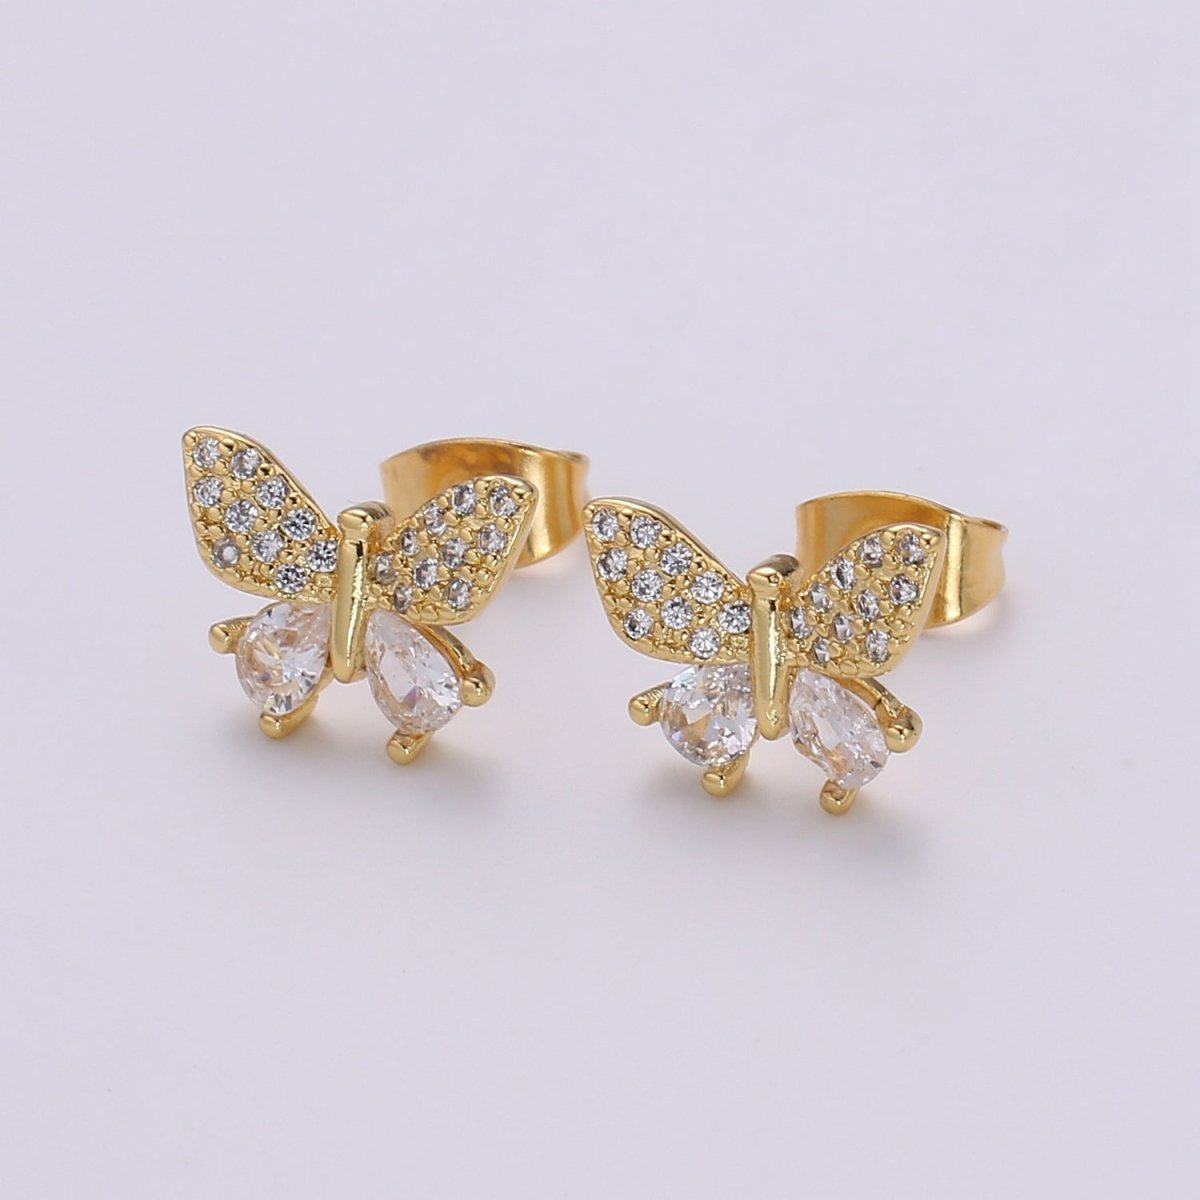 Tiny Golden Butterfly Stud Earrings CZ Mini Gold Filled Mariposa Animal Nature Formal/Casual Daily Wear Earring Jewelry P-021 - DLUXCA